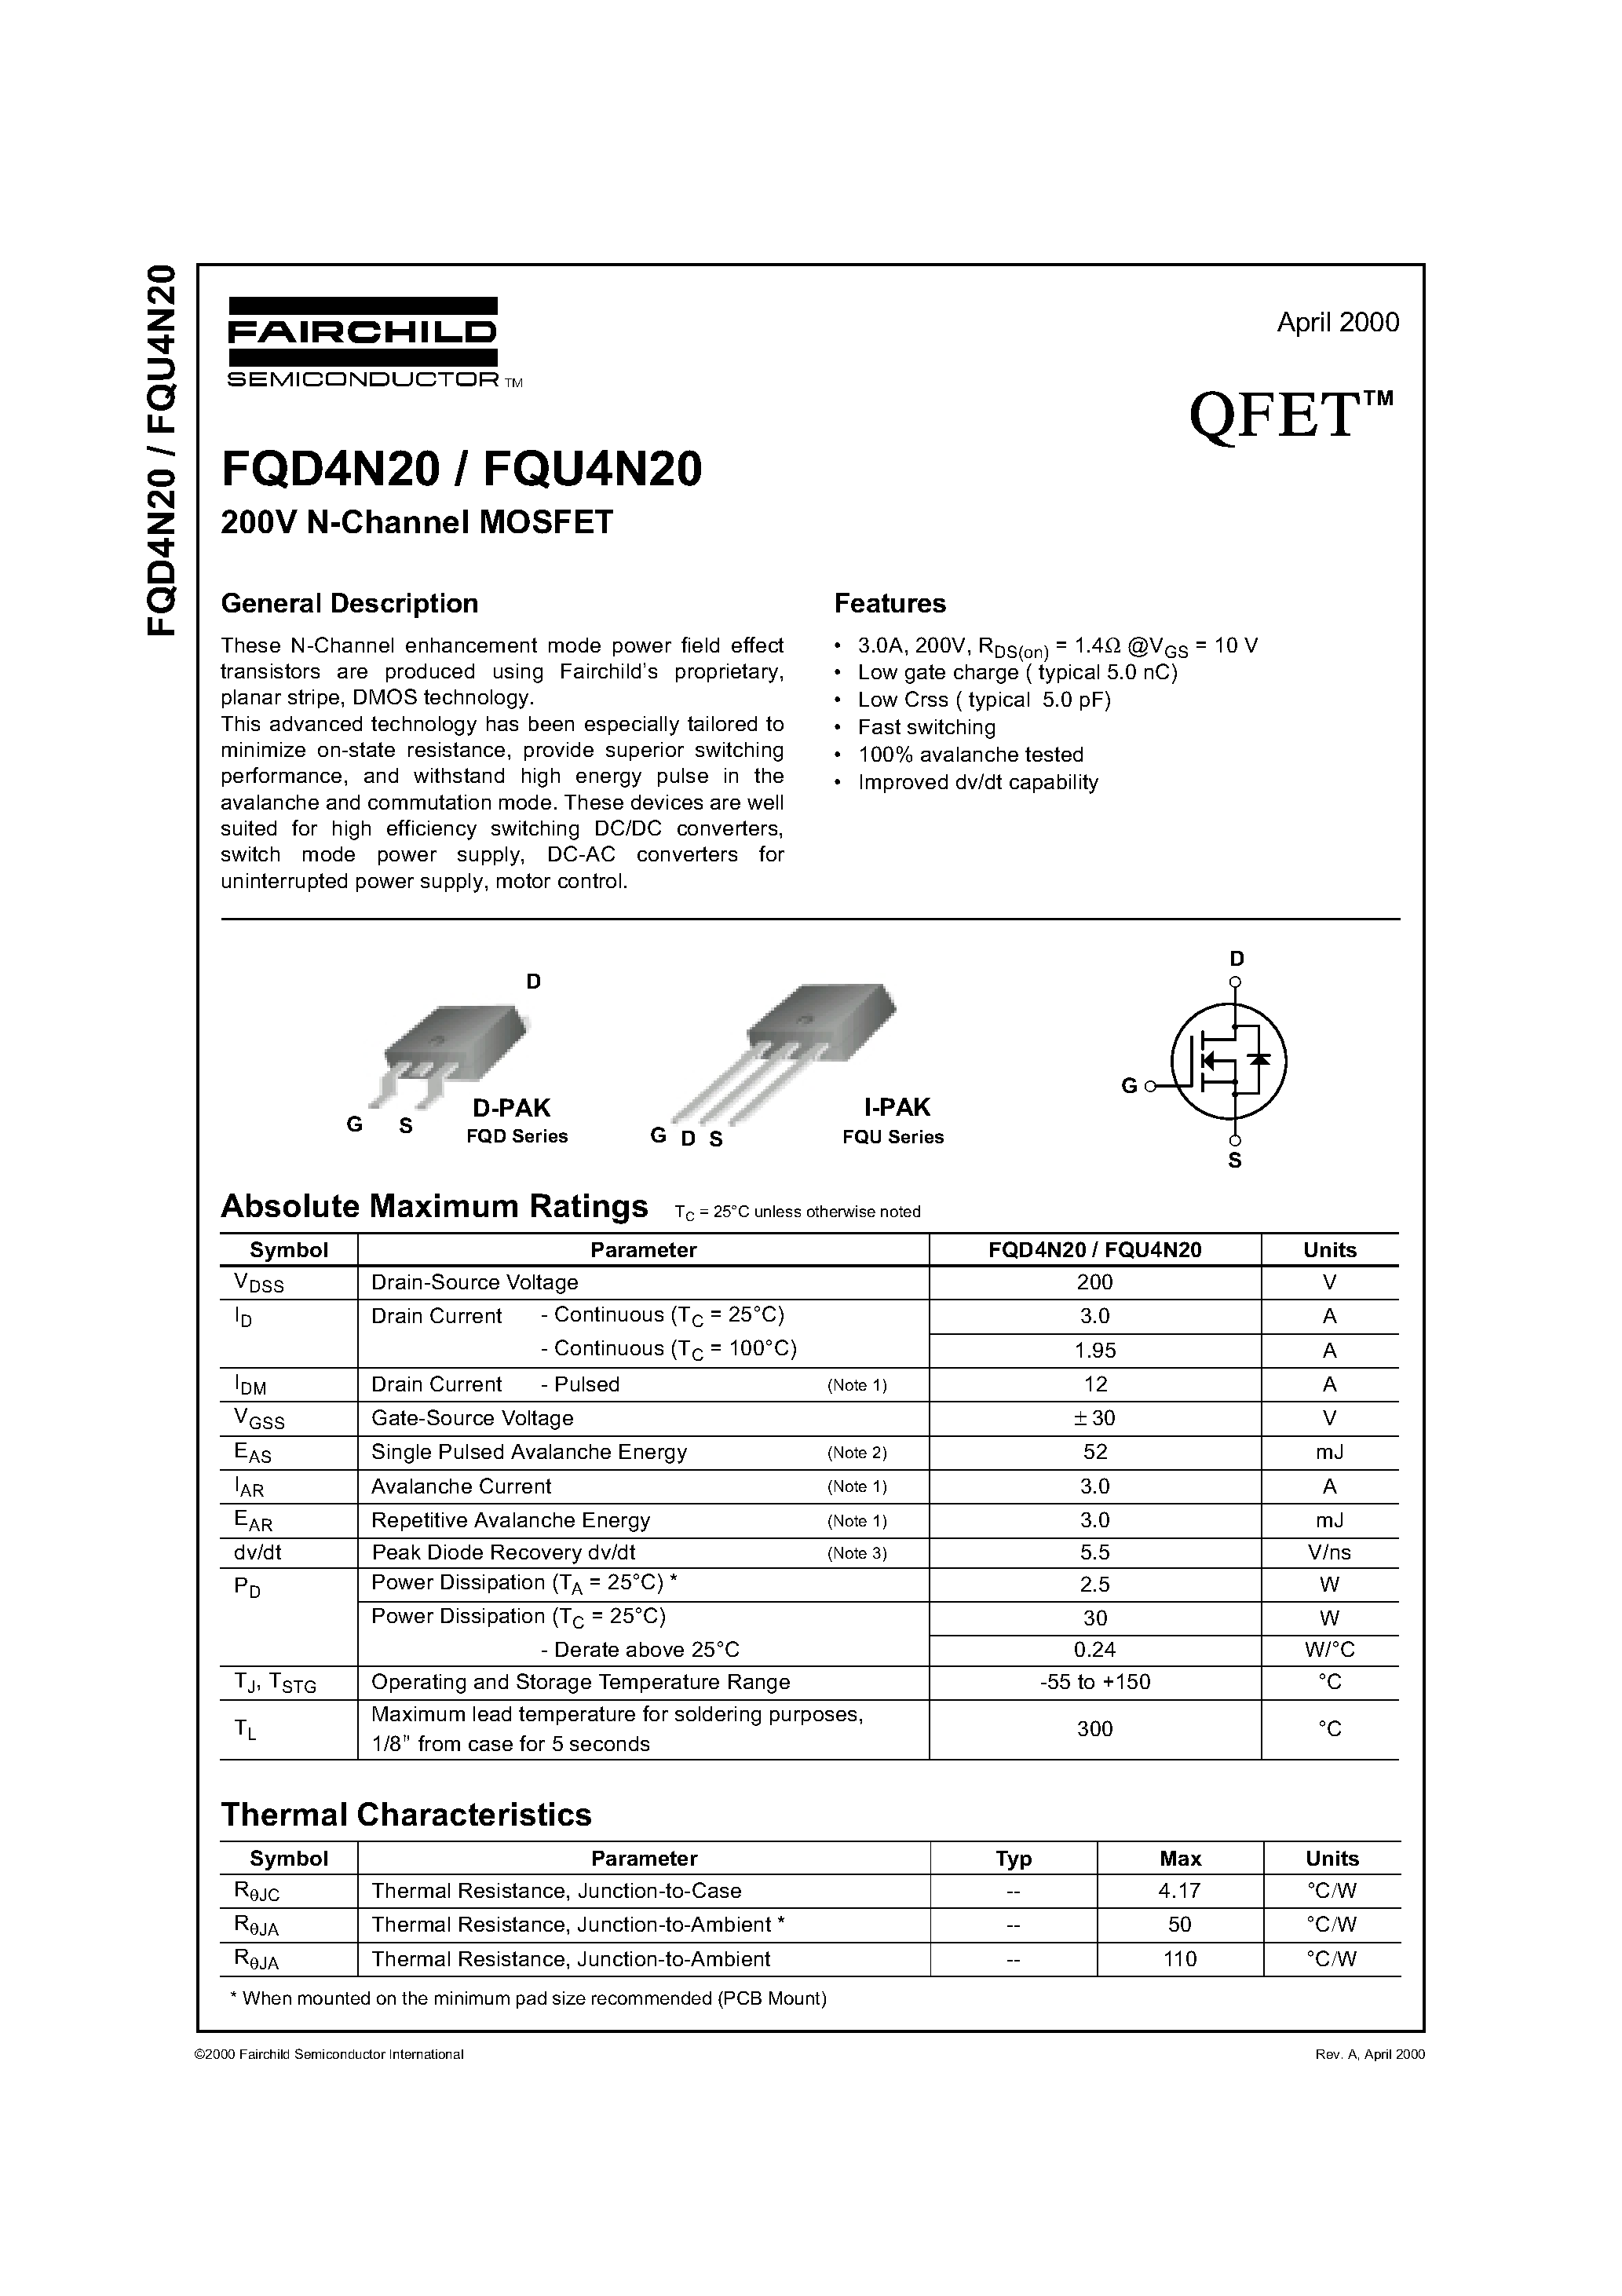 Datasheet FQD4N20 - 200V N-Channel MOSFET page 1